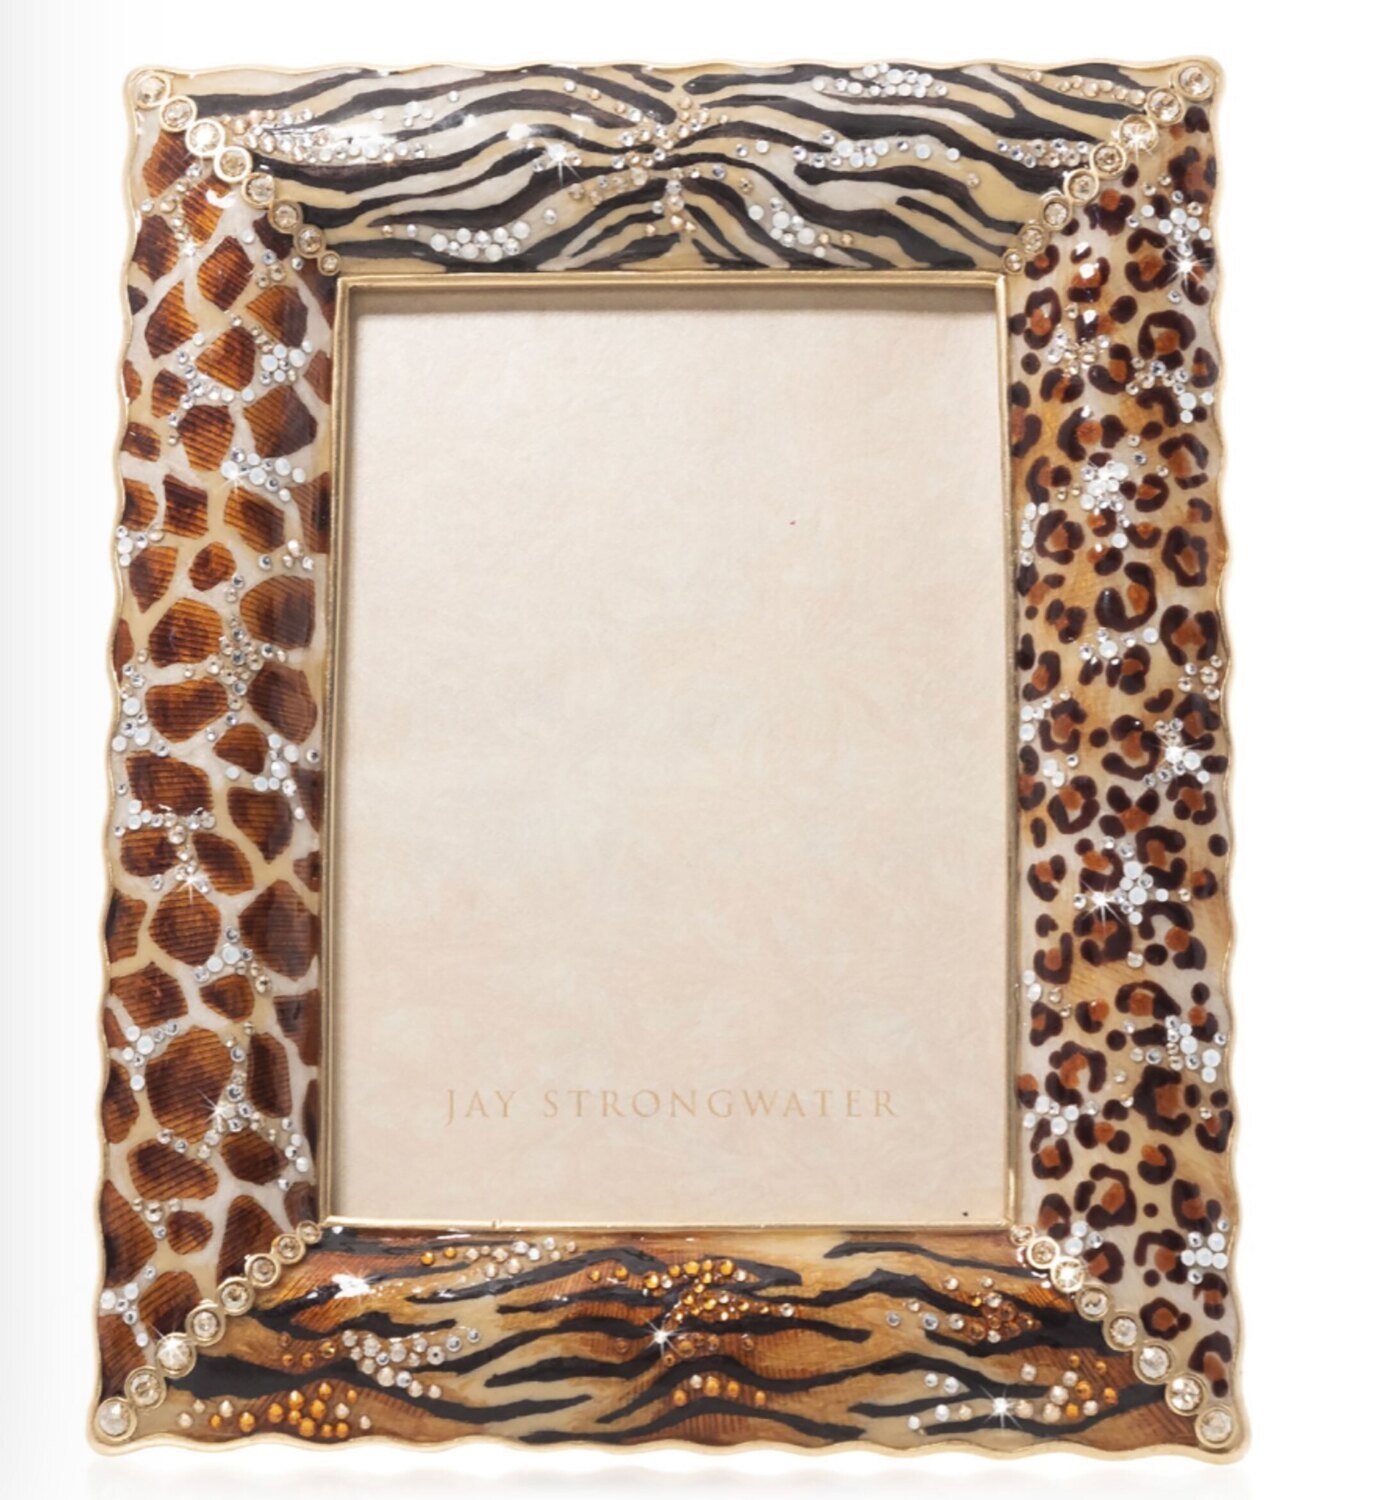 Jay Strongwater 5 x 7 Mixed Animal Print Picture Frame SPF5884-251